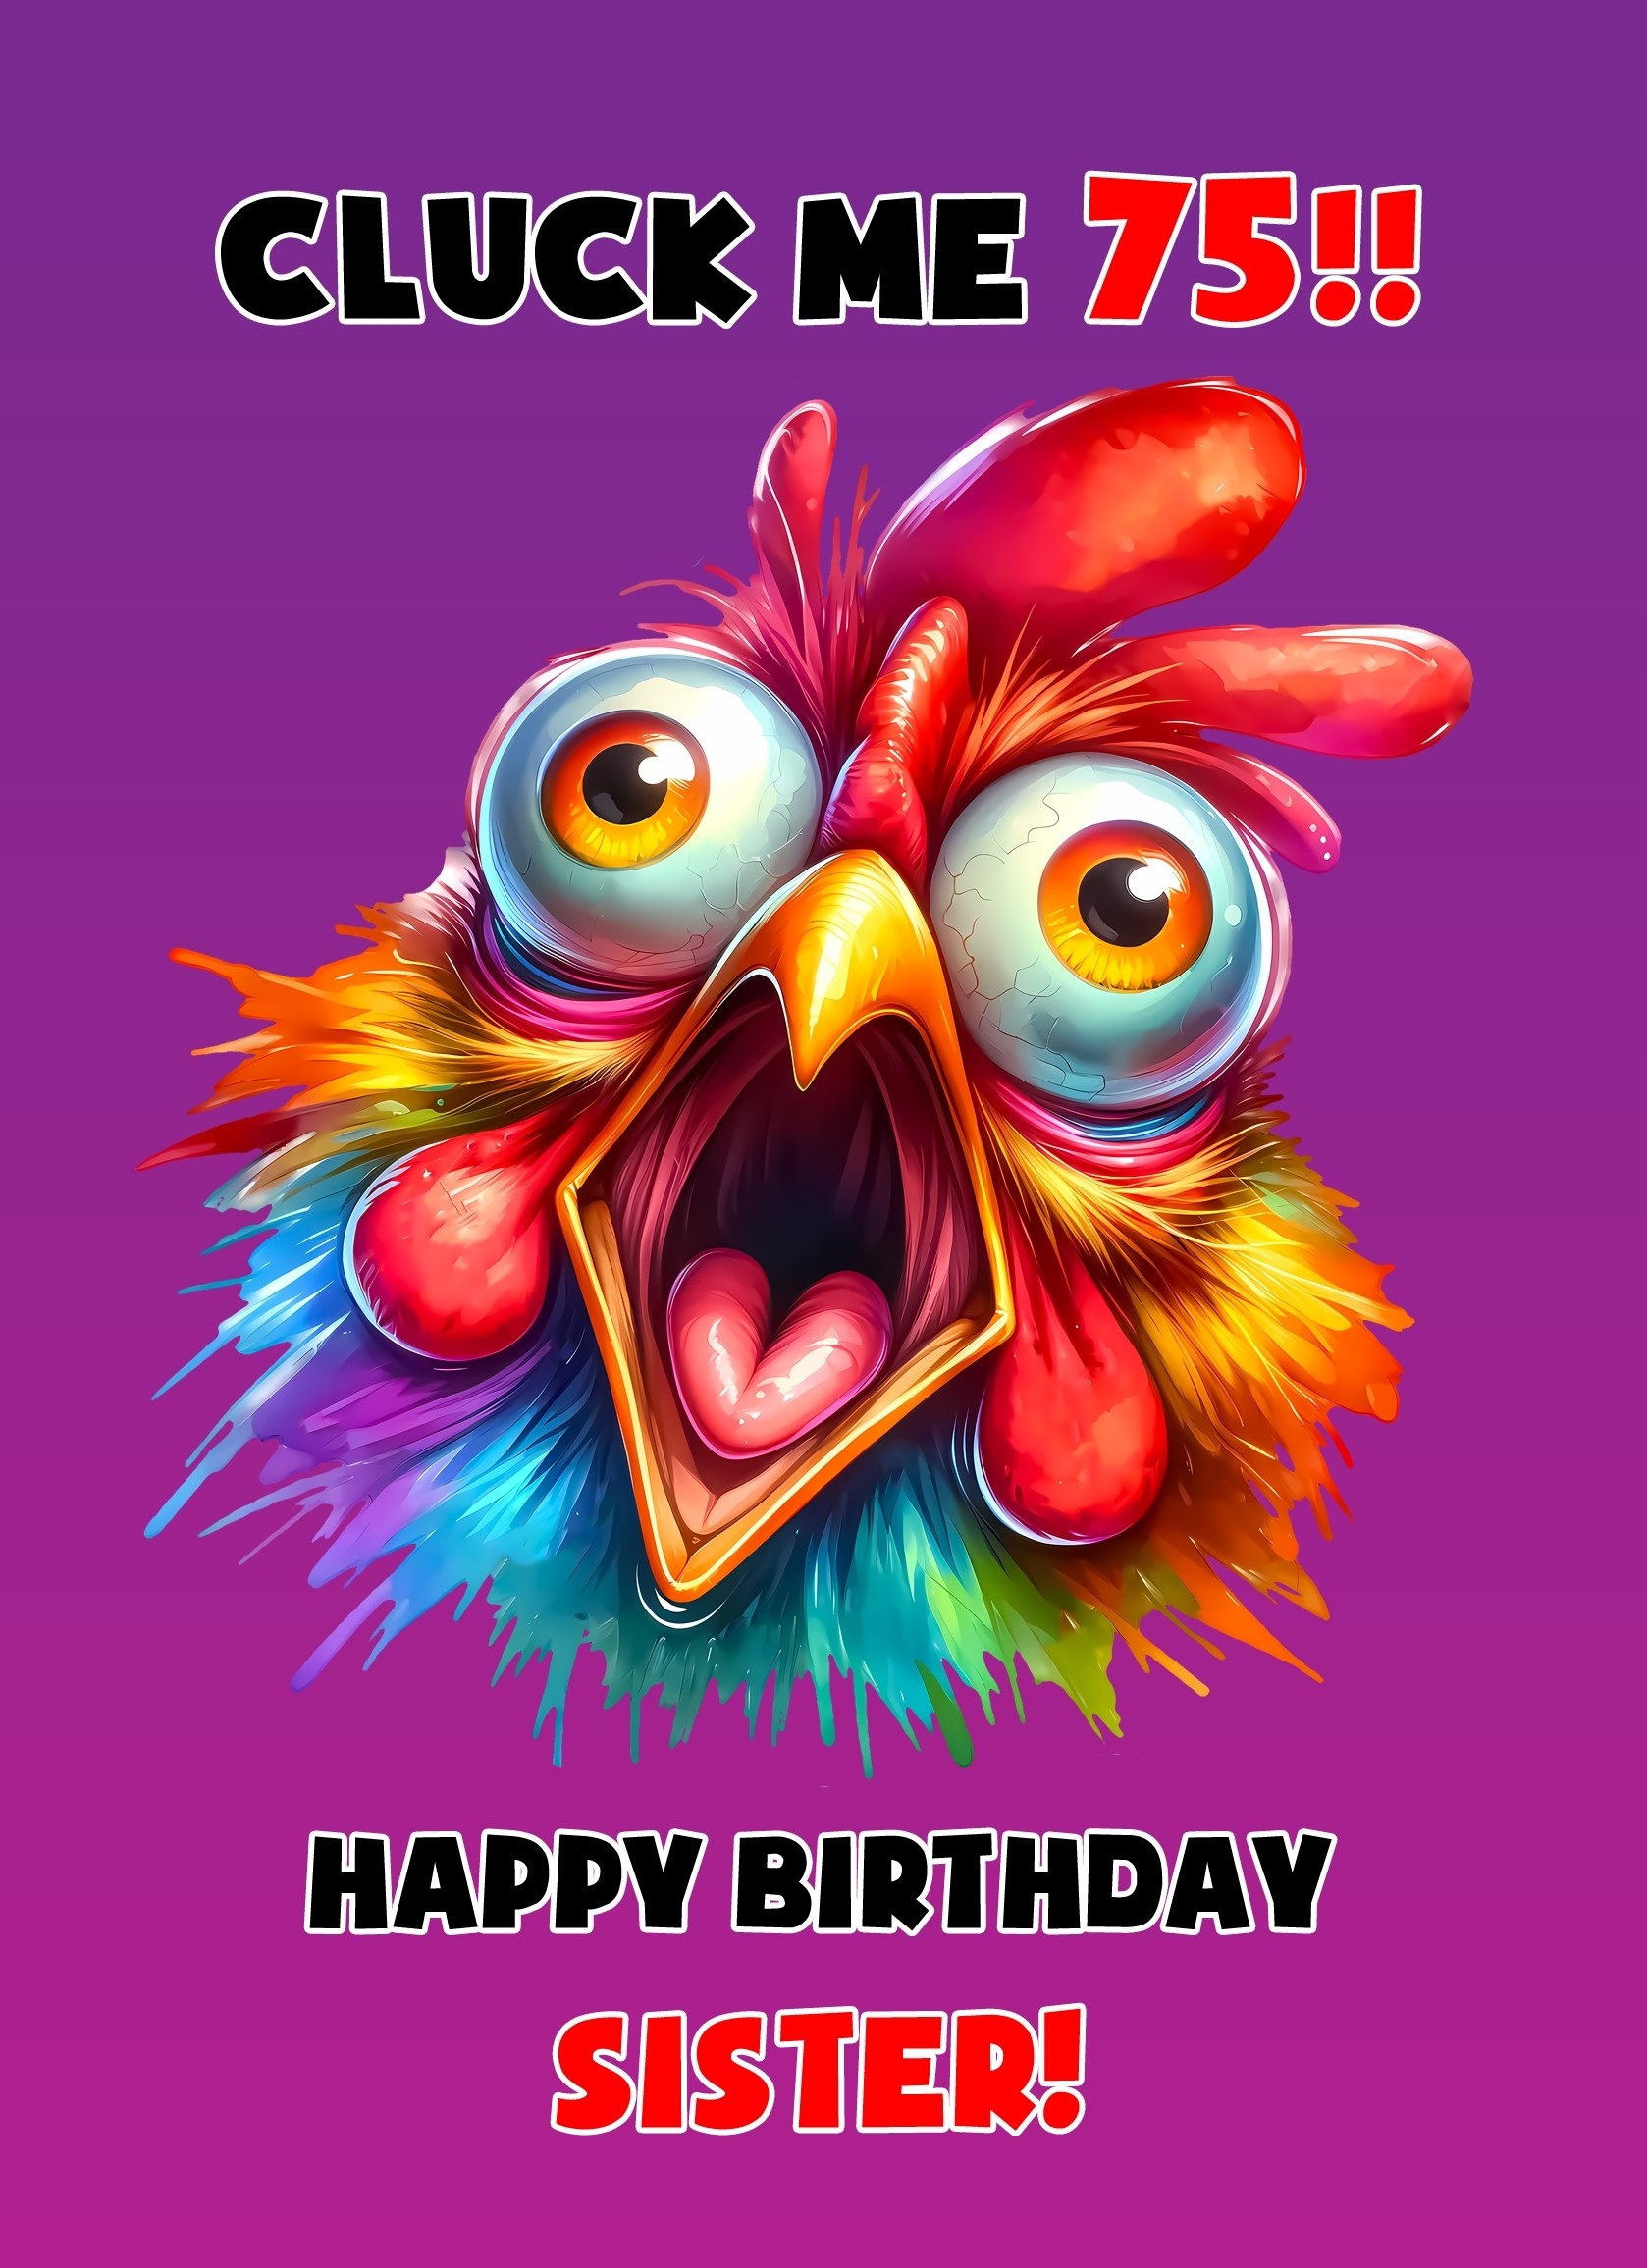 Sister 75th Birthday Card (Funny Shocked Chicken Humour)